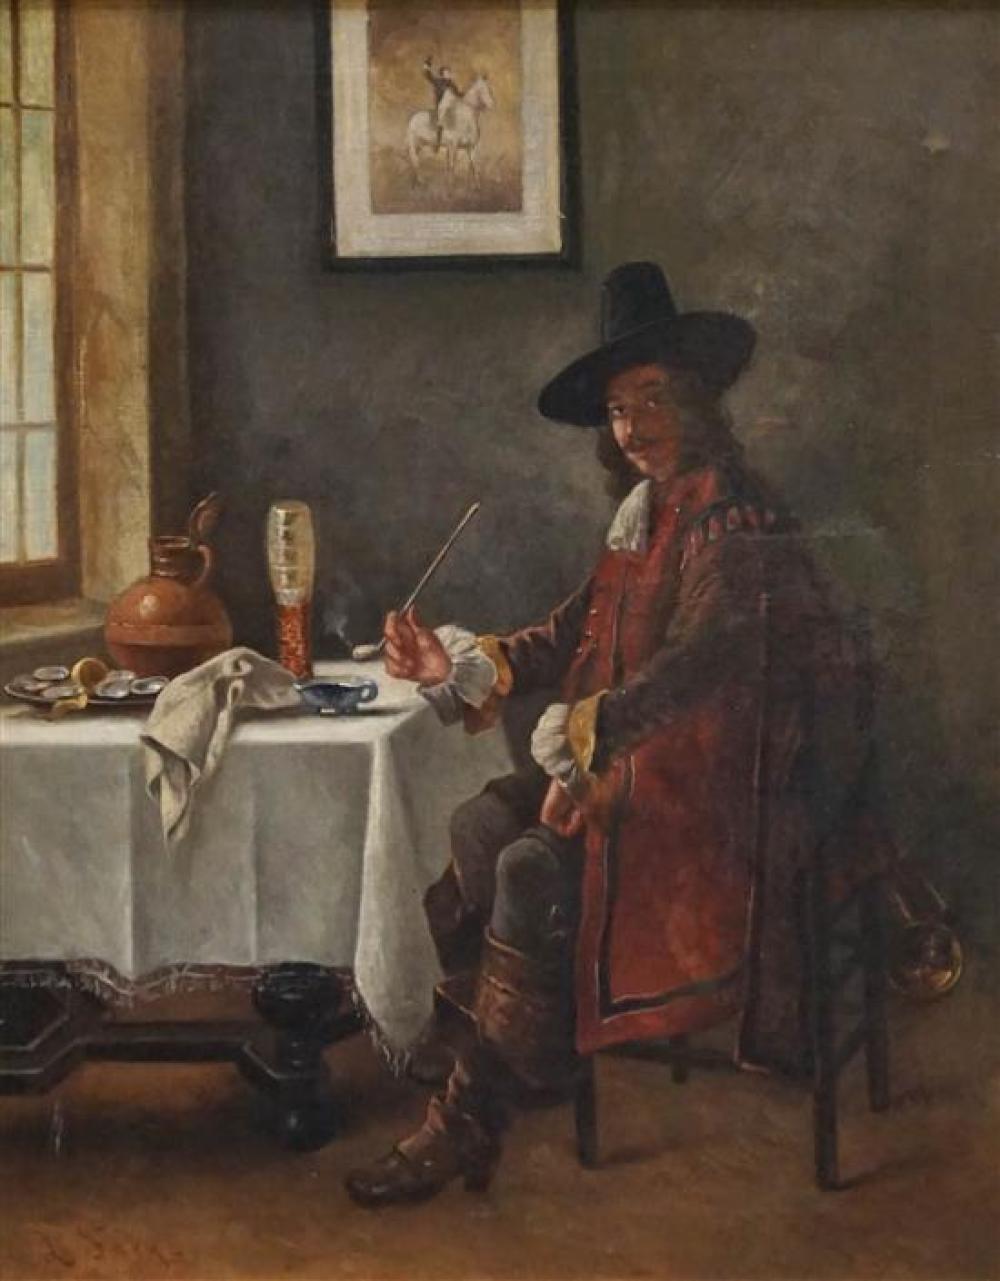 LE FARGE, MAN SEATED IN TAVERN,